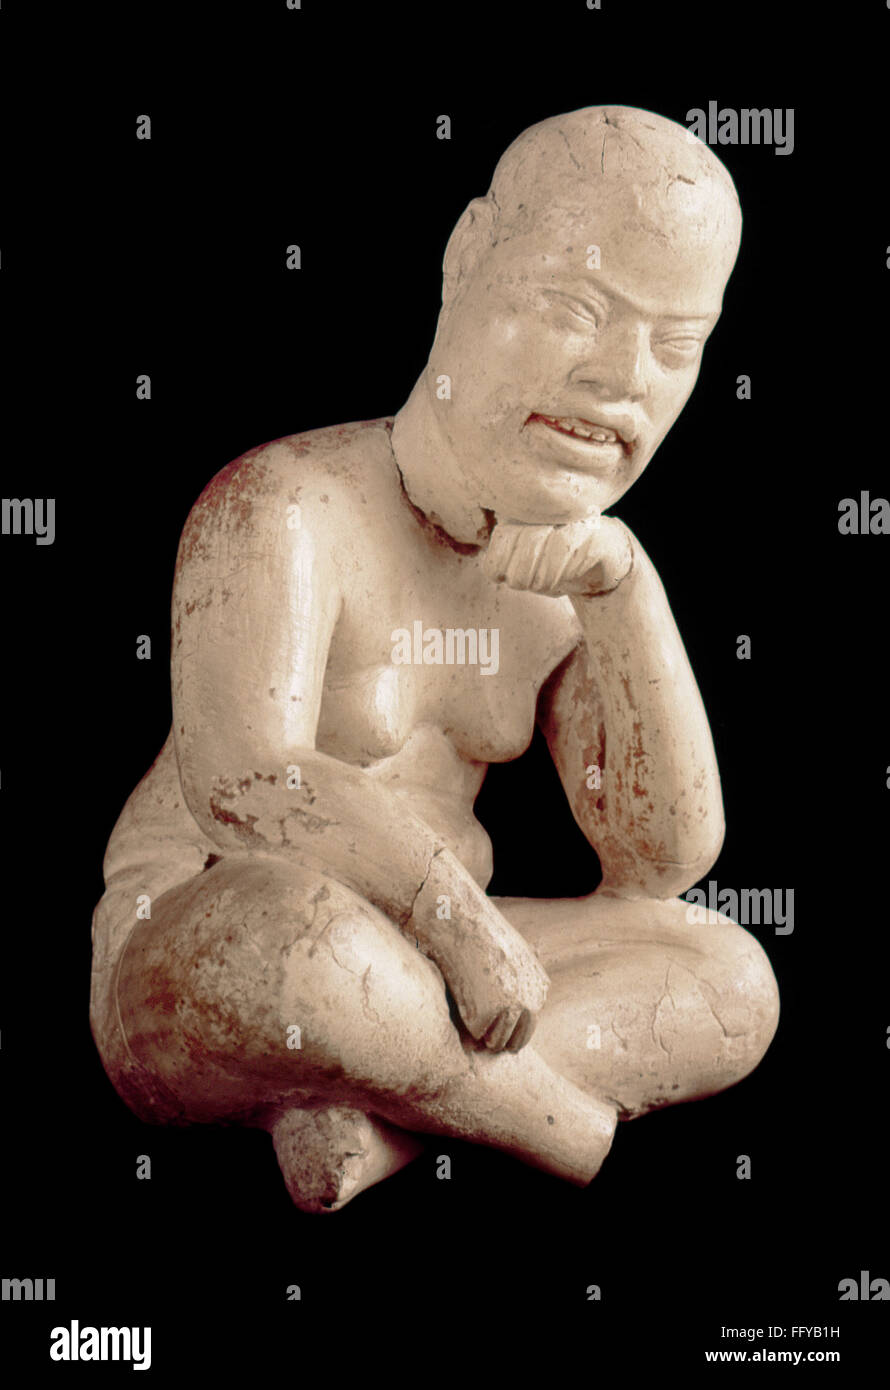 MEXICO: SEATED FIGURE. /nPolished slipped pottery sculpture of a seated figure. From Las Bocas, Puebla, Mexico, 1150-550 B.C. Stock Photo